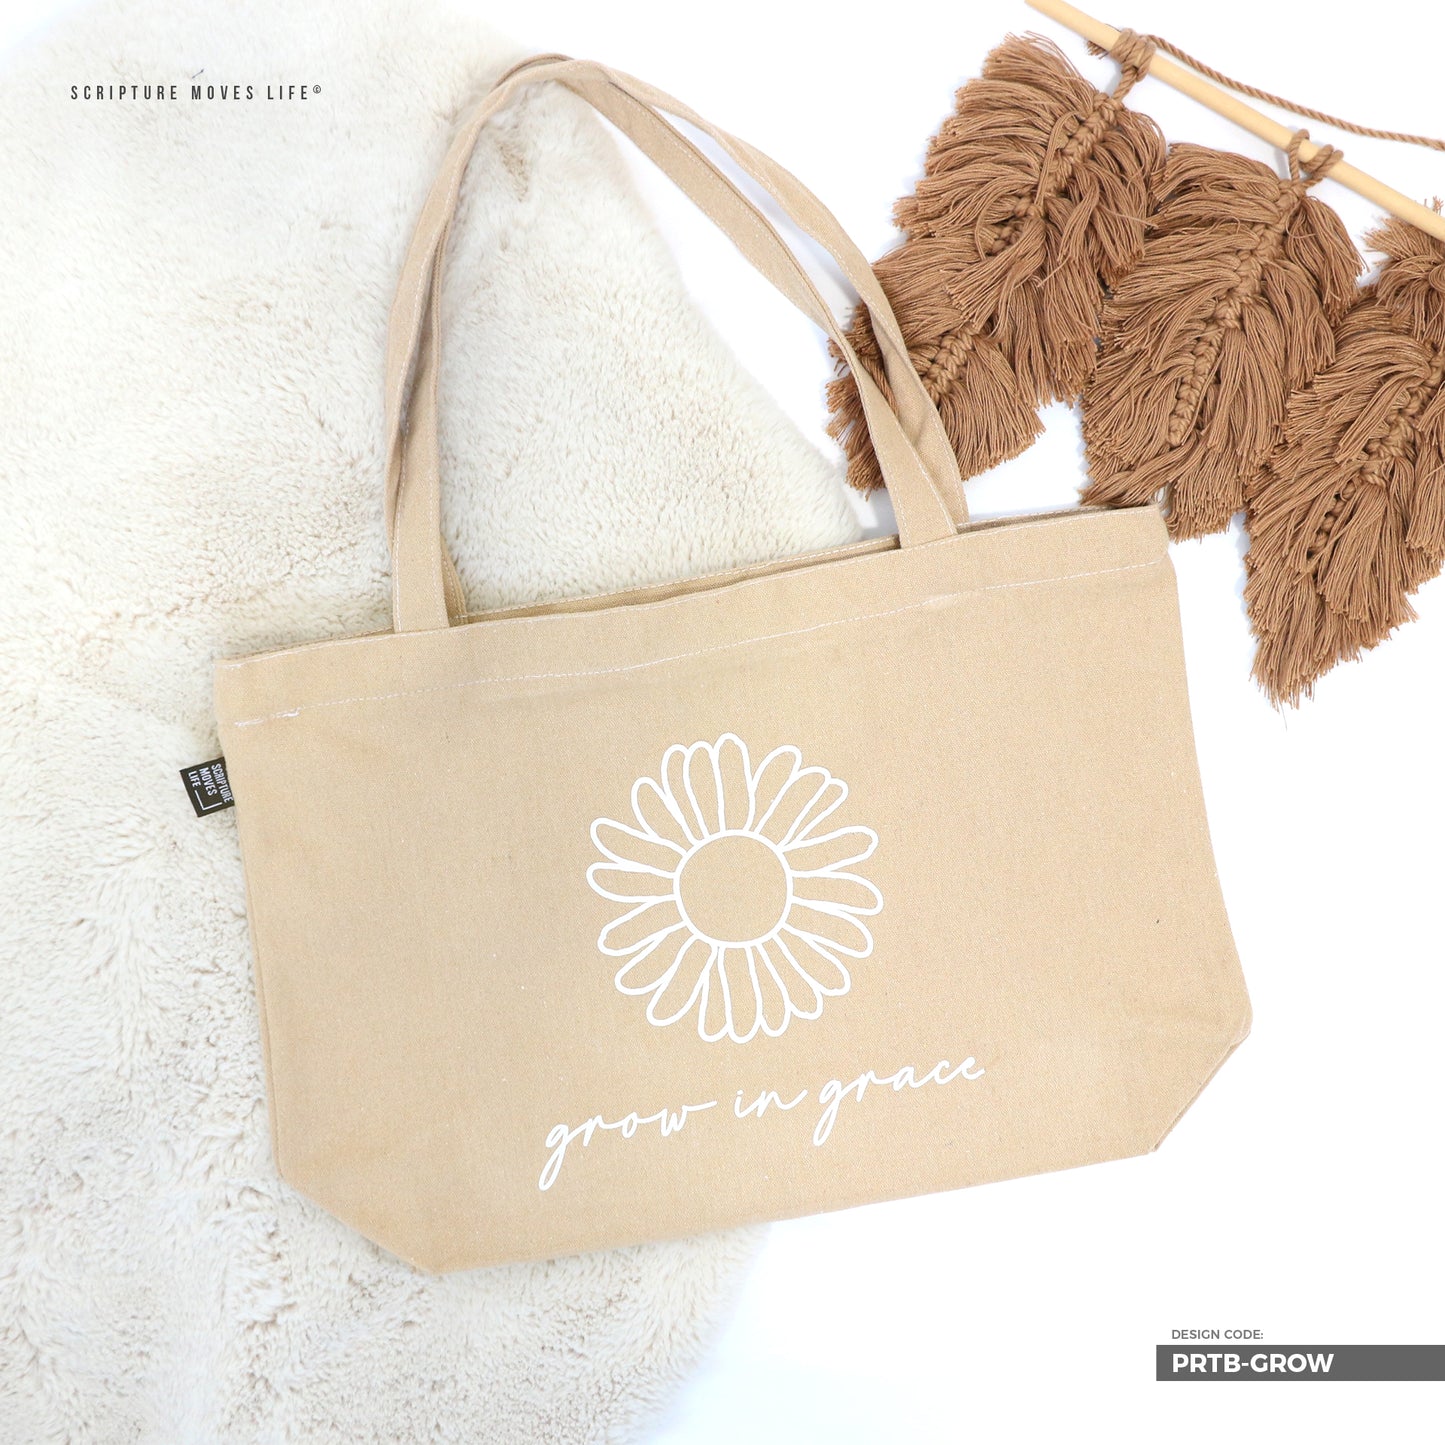 Premium Tote Bag-Grow in grace by Scripture Moves Life